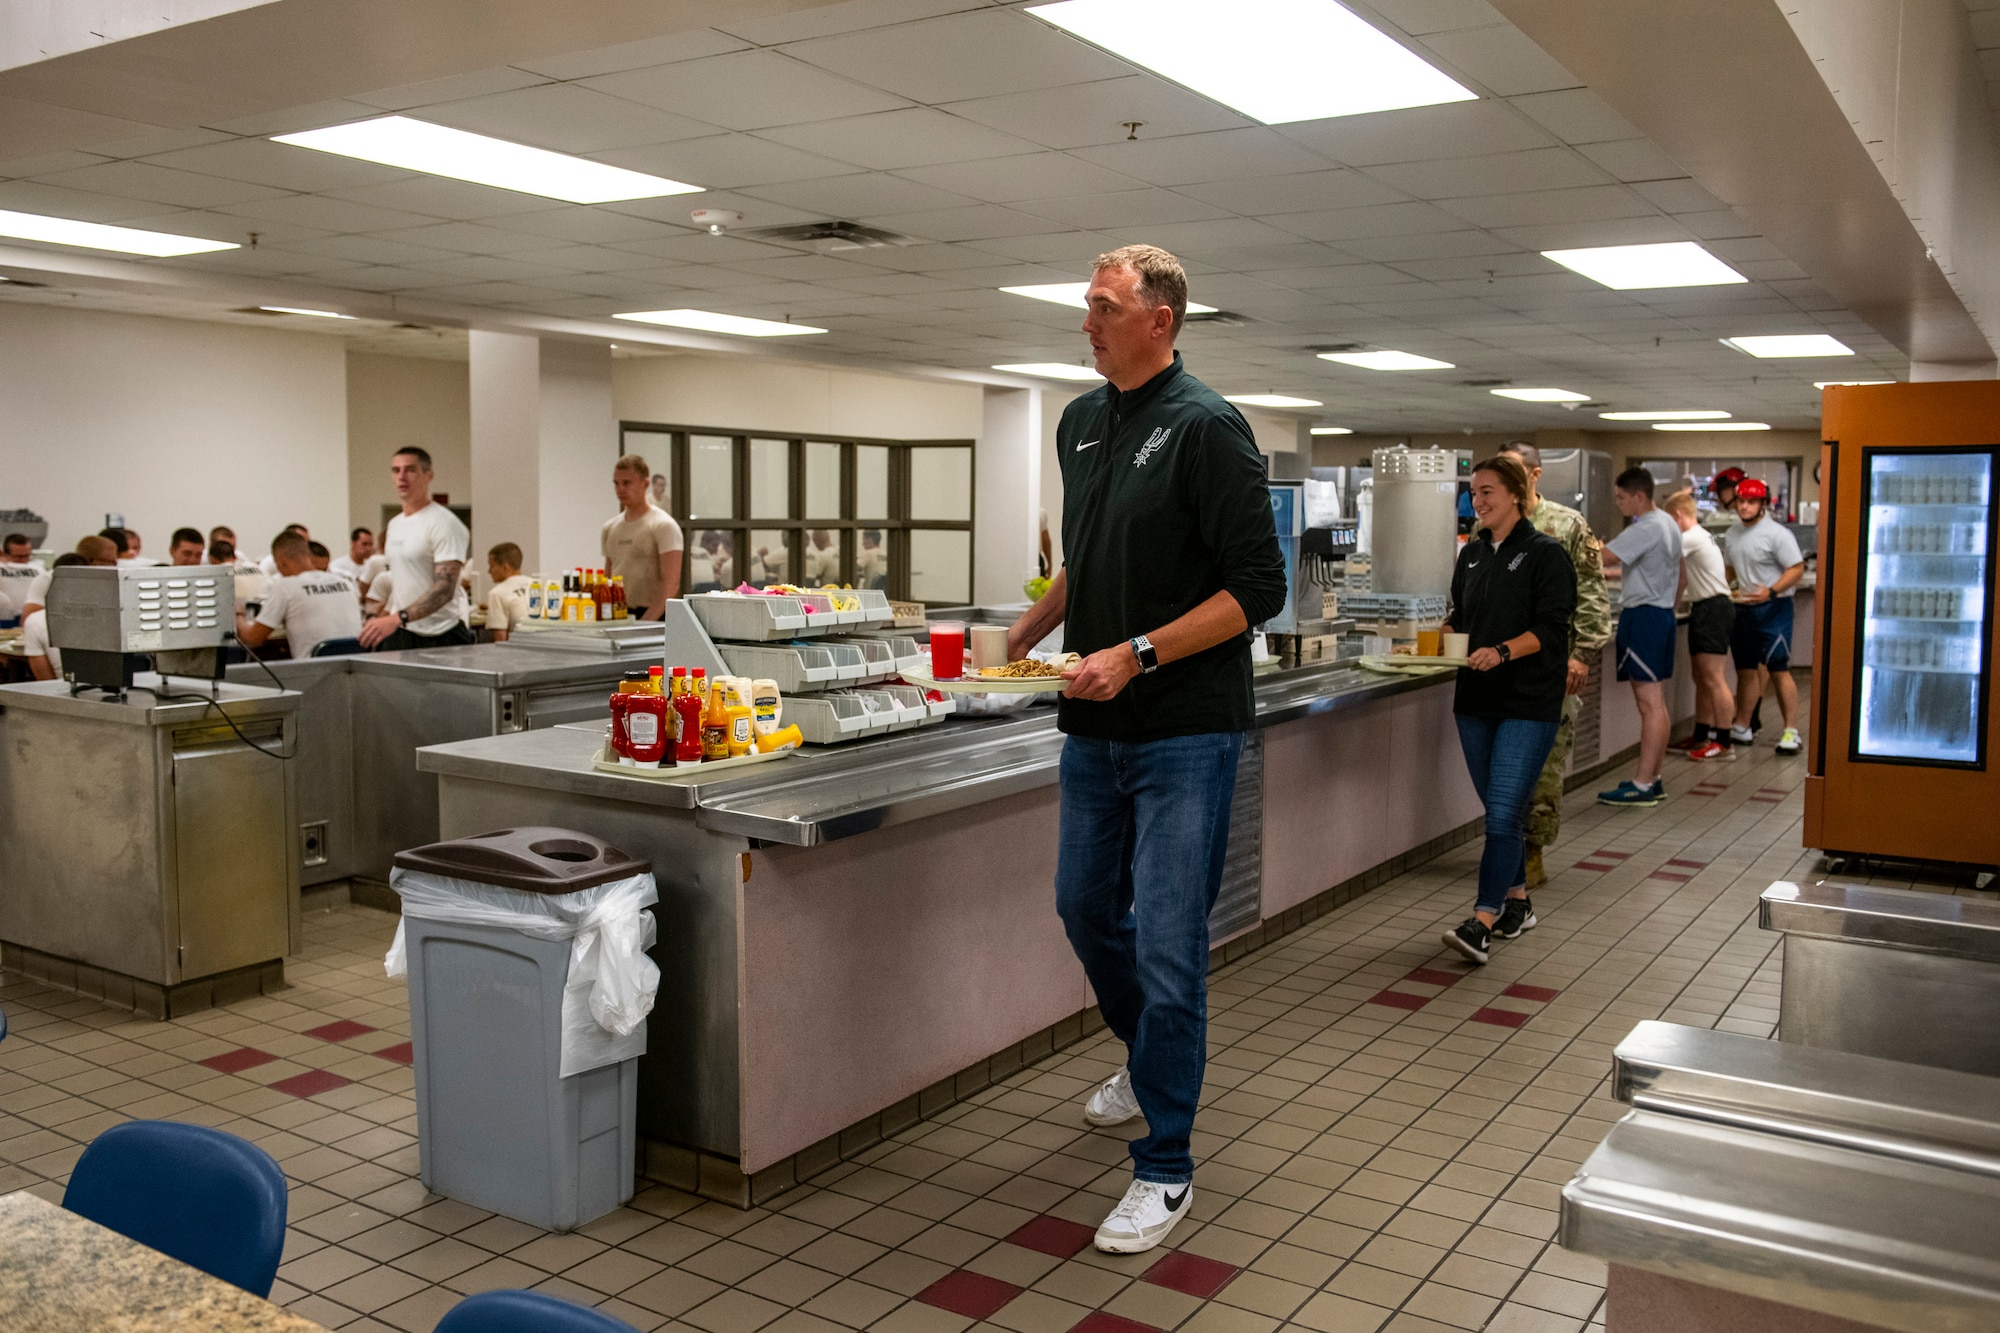 Phil Cullen, San Antonio Spurs director of basketball strategy, and Alison Nabatoff, San Antonio Spurs talent academy associate, grab lunch at the special warfare performance dining facility at Joint Base San Antonio-Lackland, Texas, Aug. 15, 2022. The SWTW and Spurs met to discuss ideas and talk strategy on human performance. (U.S. Air Force photo by Brian J. Valencia)